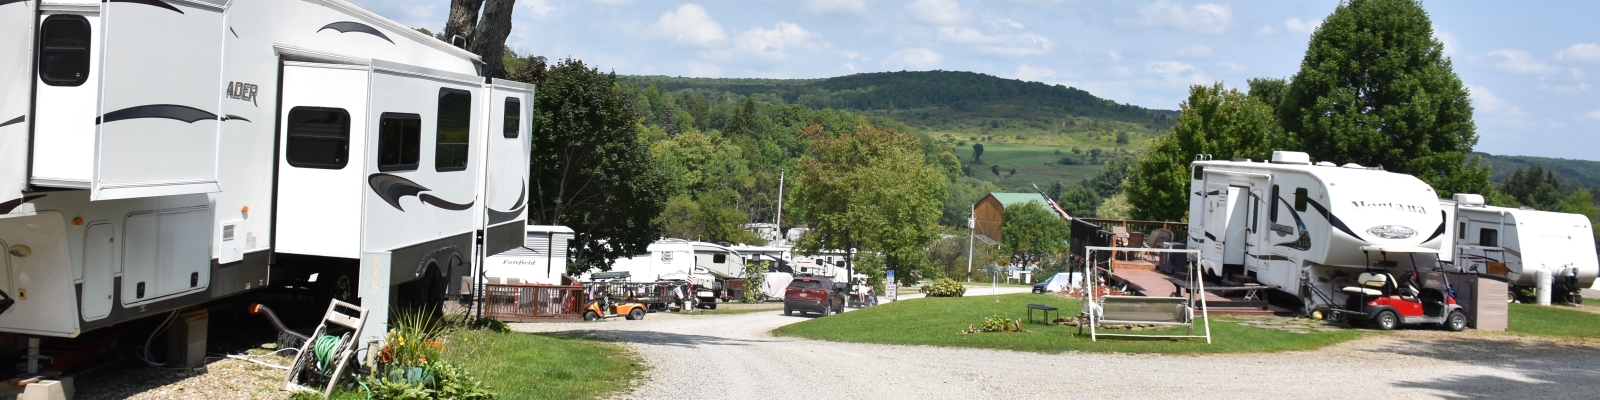 Camping at Triple R Campground